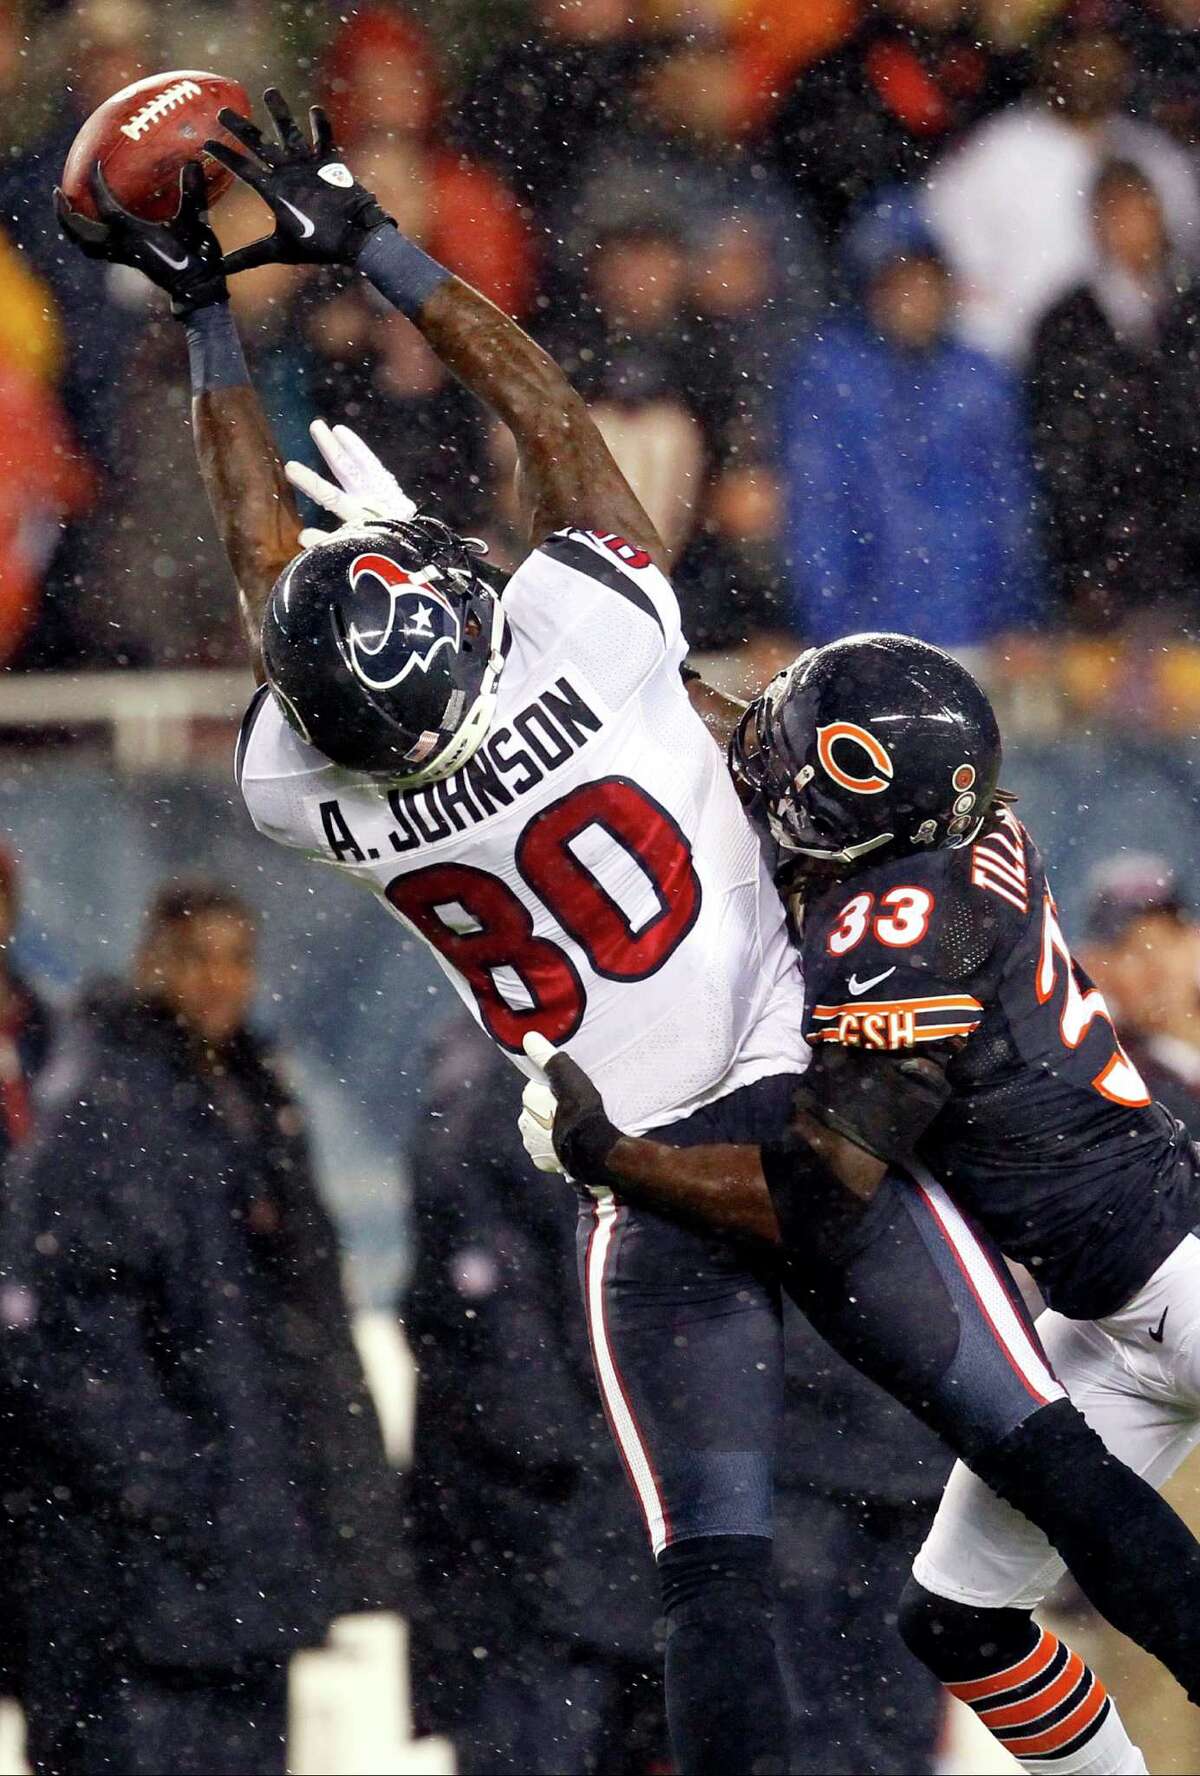 Chicago Bears cornerback Charles Tillman (33) breaks up a pass intended for Houston Texans wide receiver Andre Johnson (80) in the first half an NFL football game, Sunday, Nov. 11, 2012, in Chicago. (AP Photo/Charles Rex Arbogast)